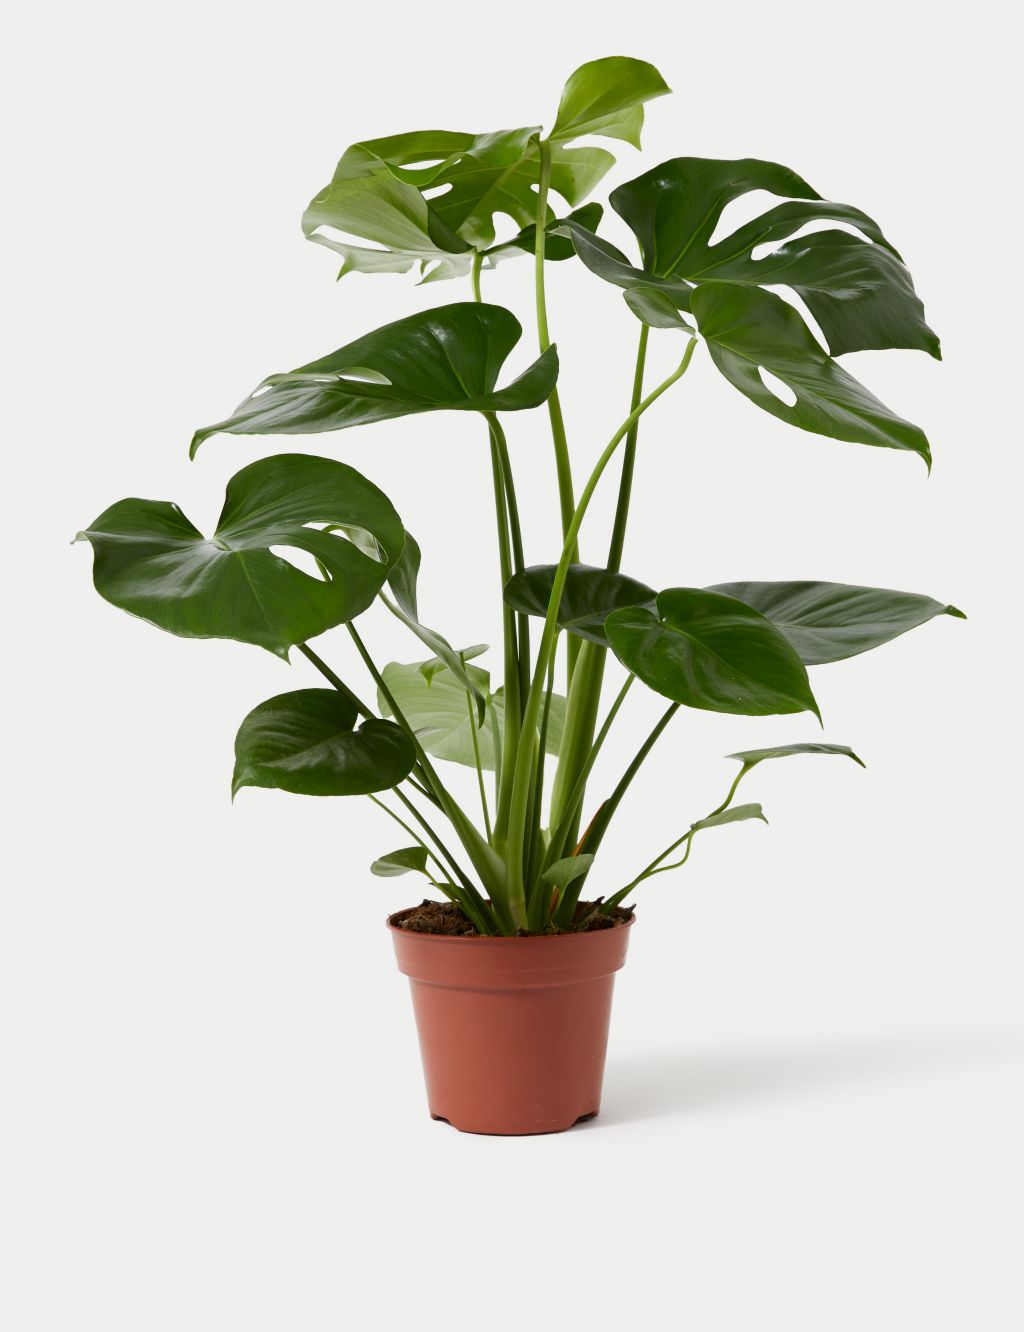 Large Monstera (Swiss Cheese Plant) 3 of 4